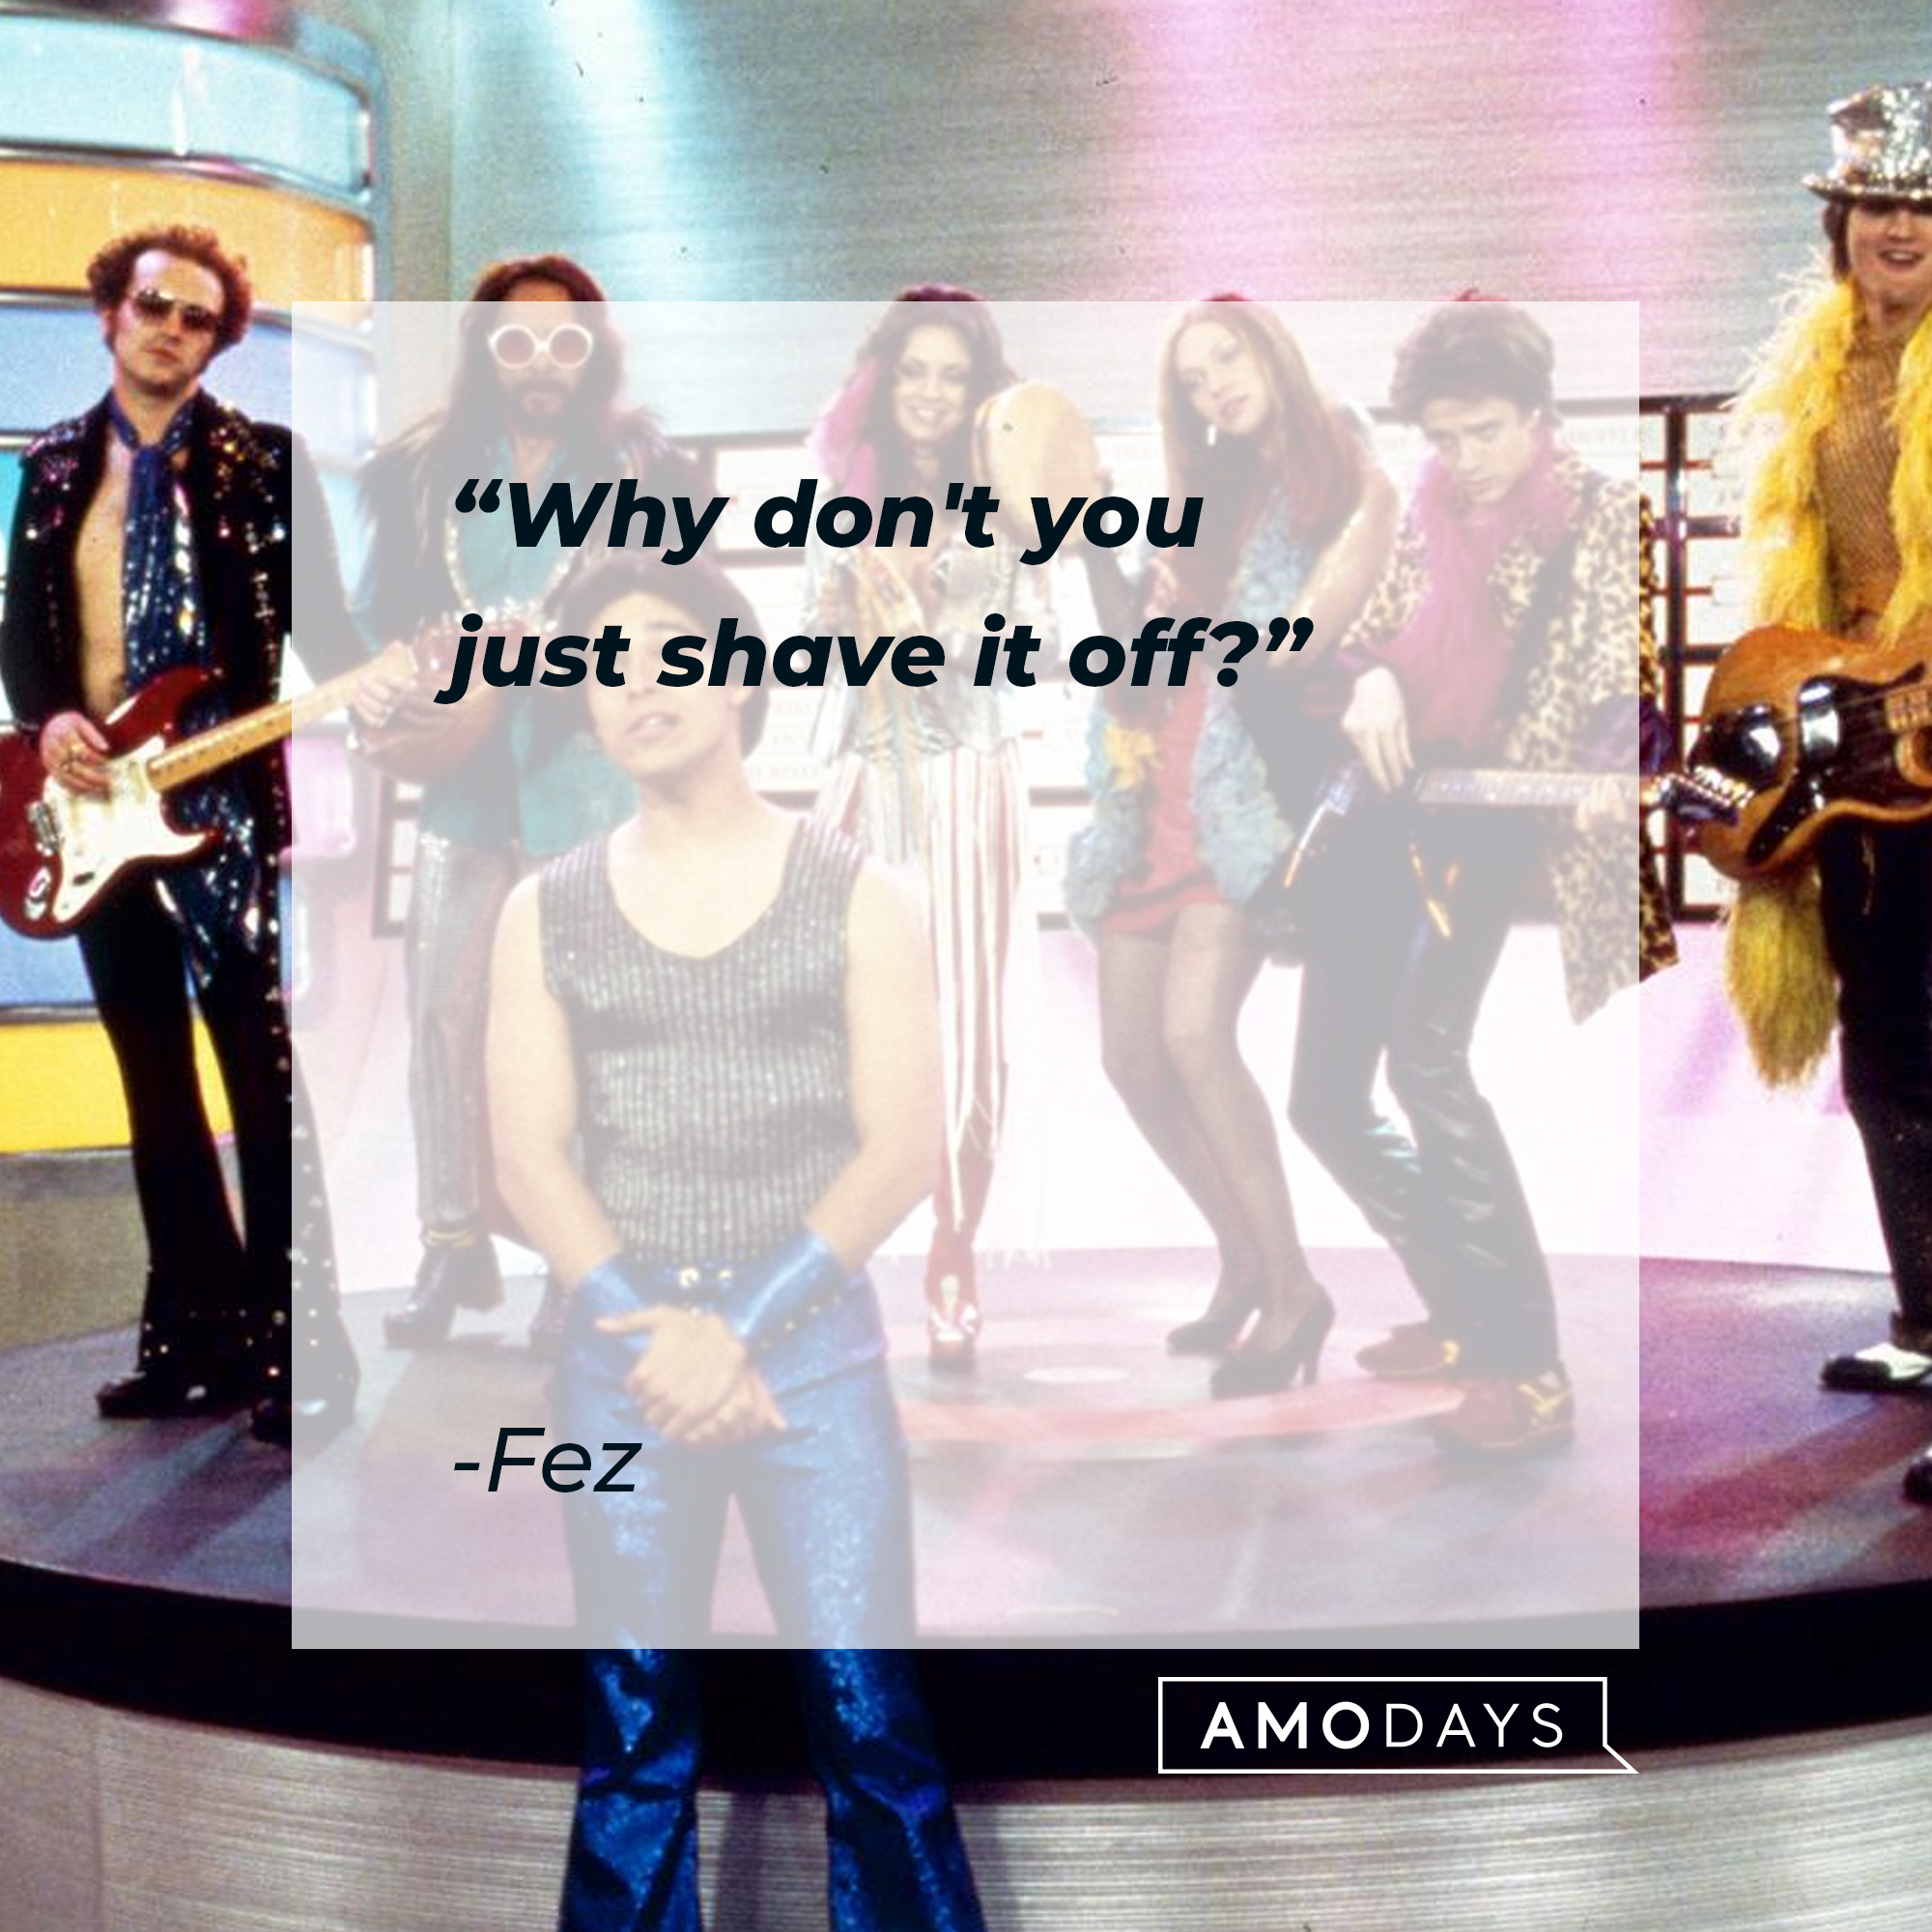 Fez's quote: “Why don't you just shave it off?" | Source: facebook.com/That-70s-Show-Official